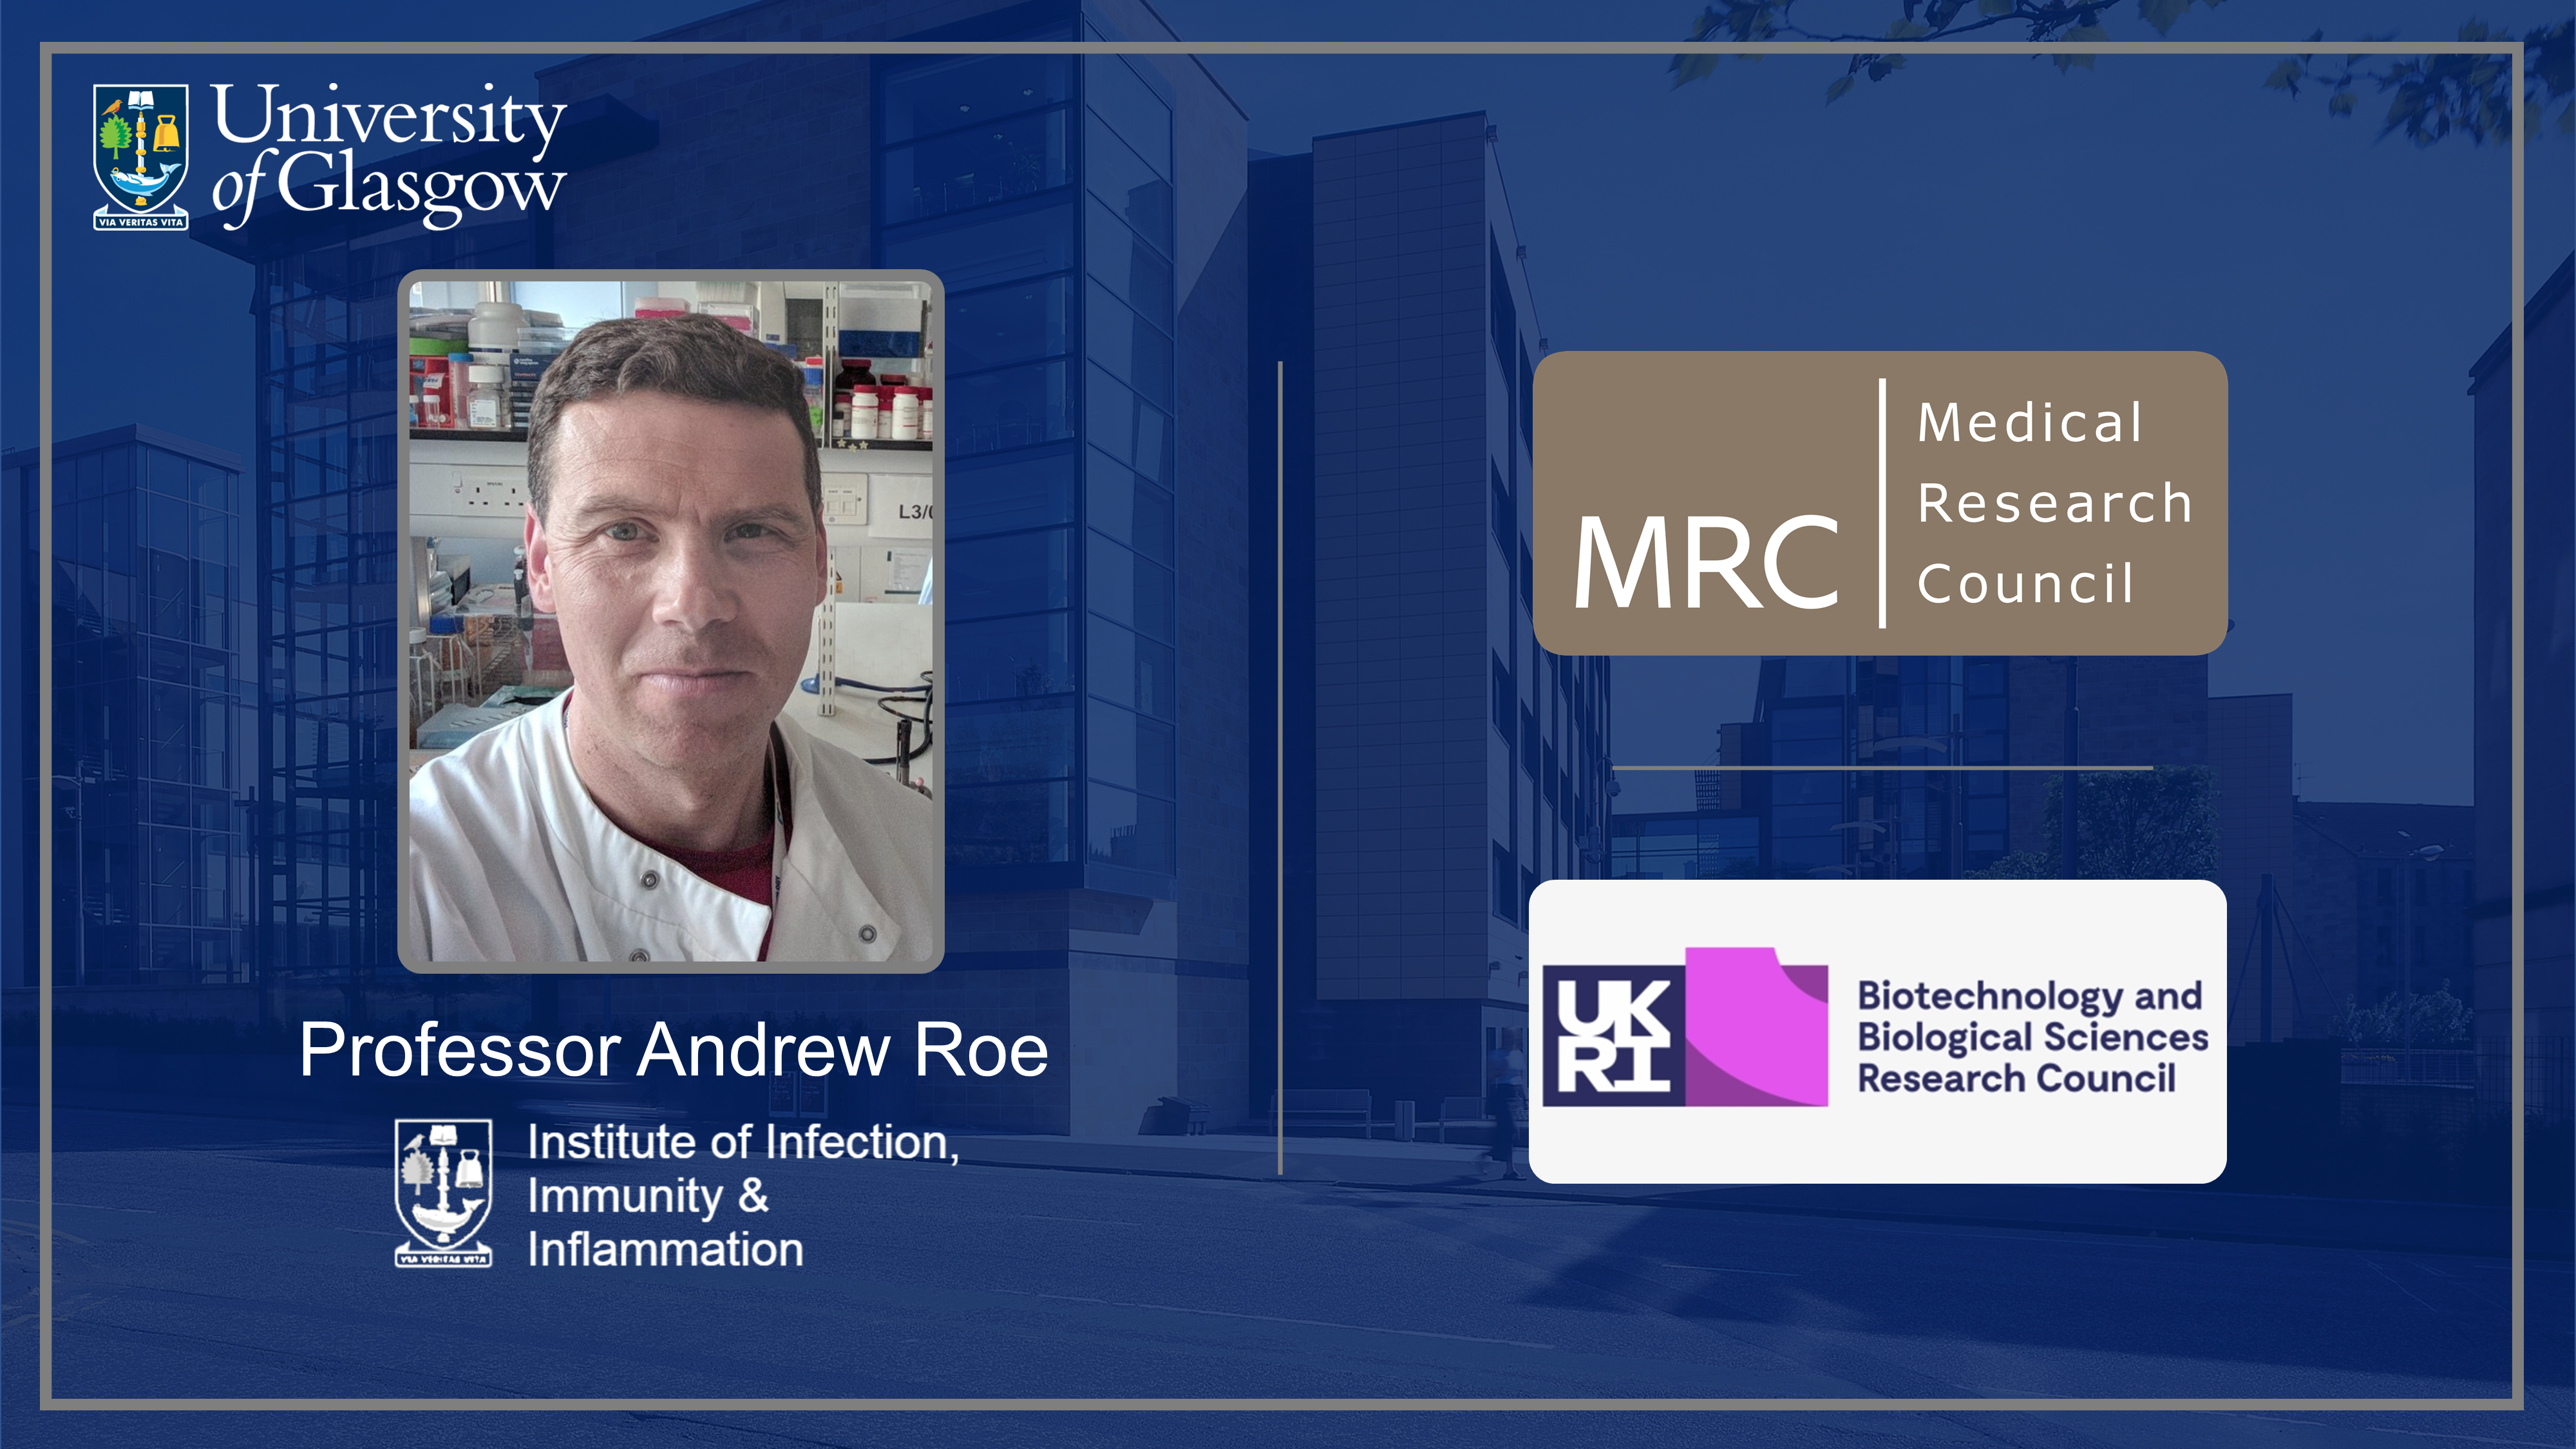 A graphic showing Professor Andrew Roe and logos for BBSRC and MRC